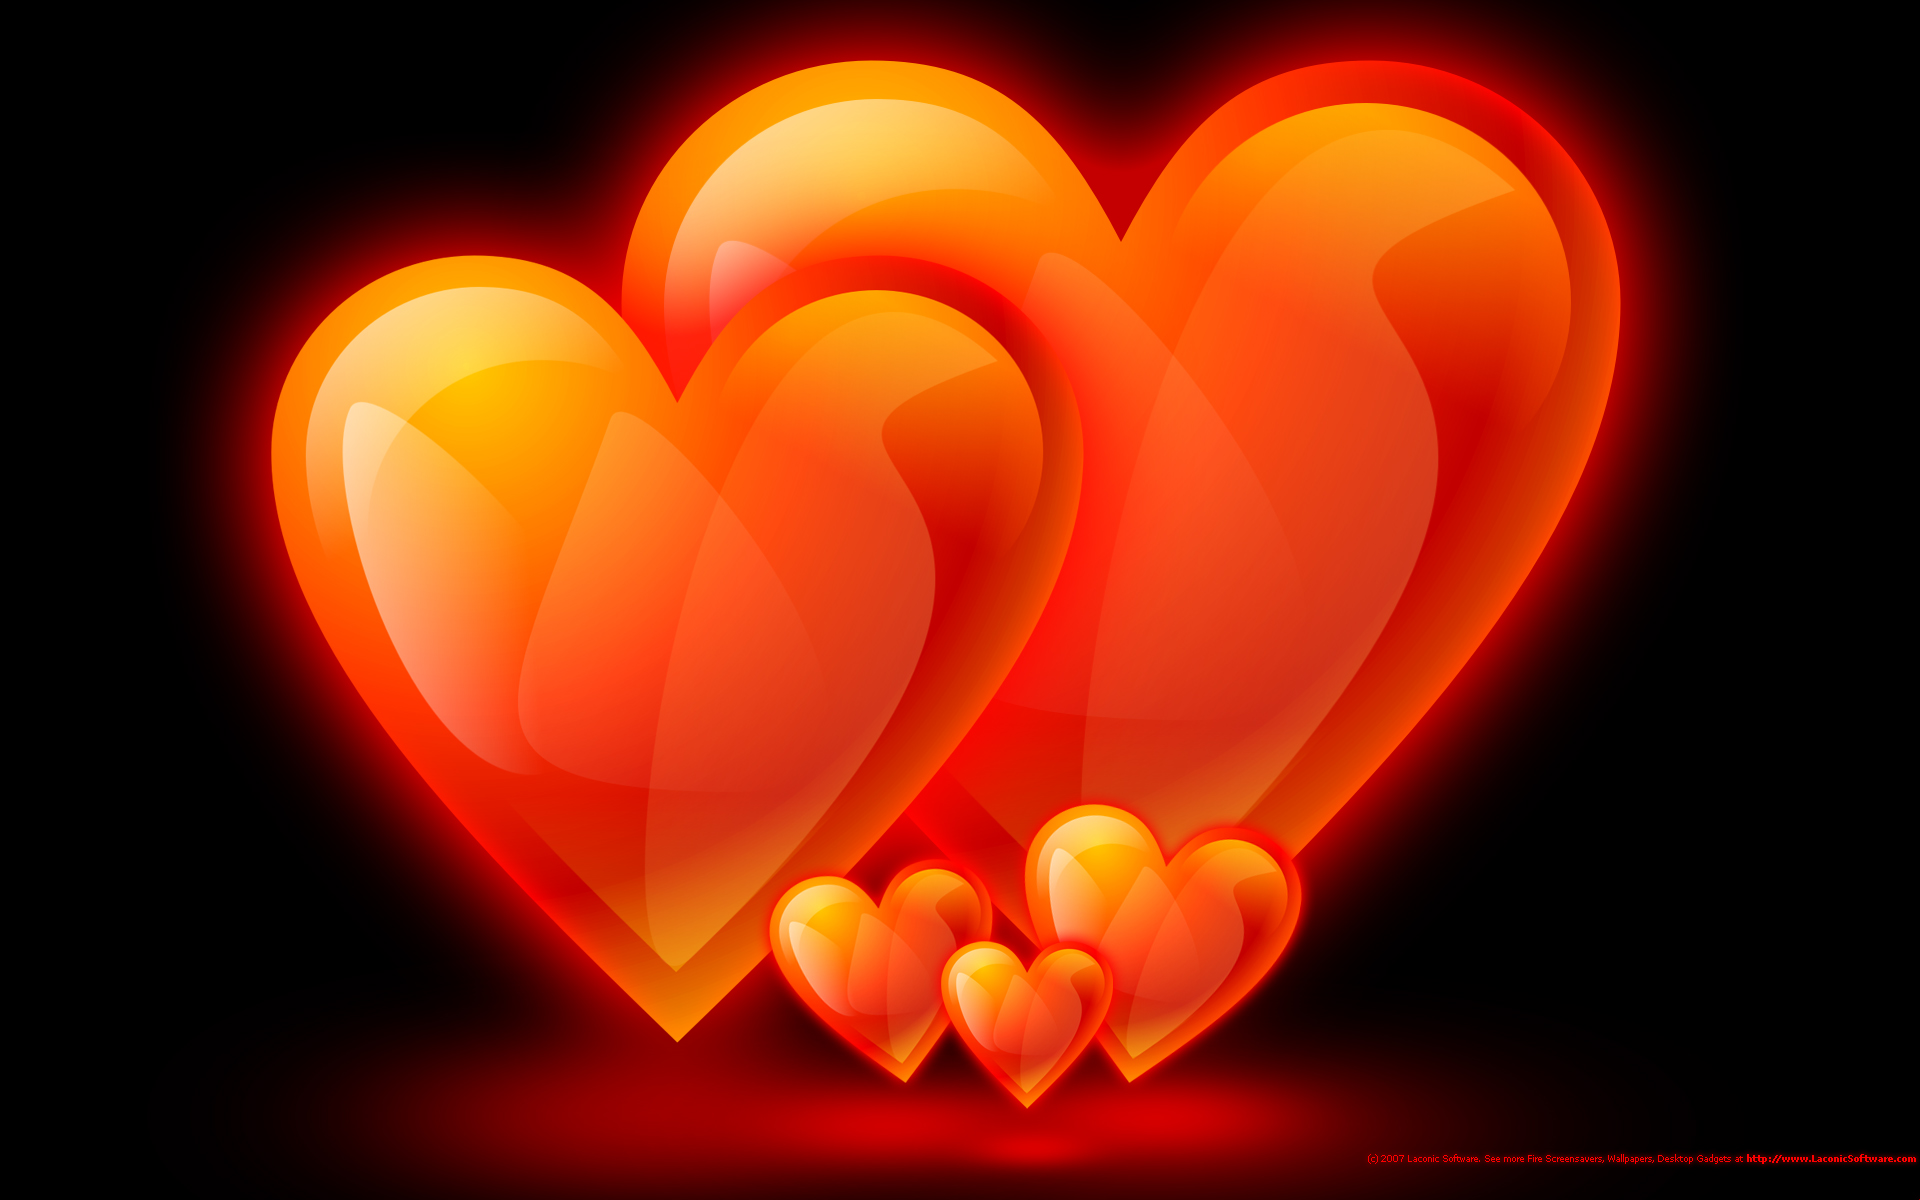  flame wallpaper hearts family wallpapers screensavers background